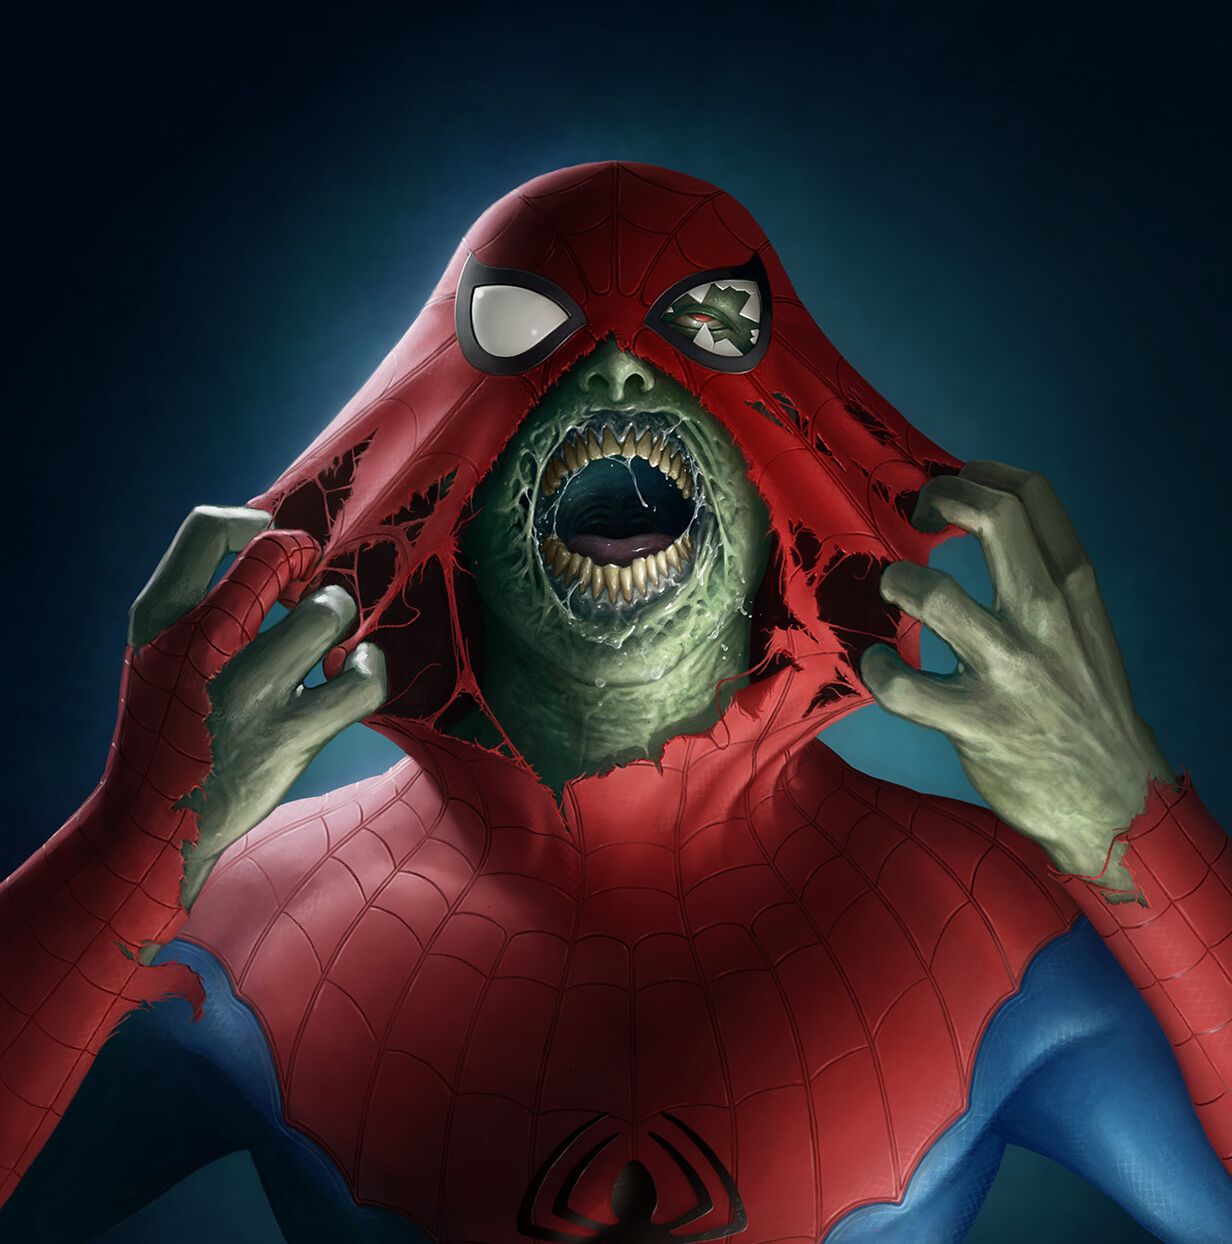 WHAT WAS THE ZOMBIE SPIDERMAN LIKE